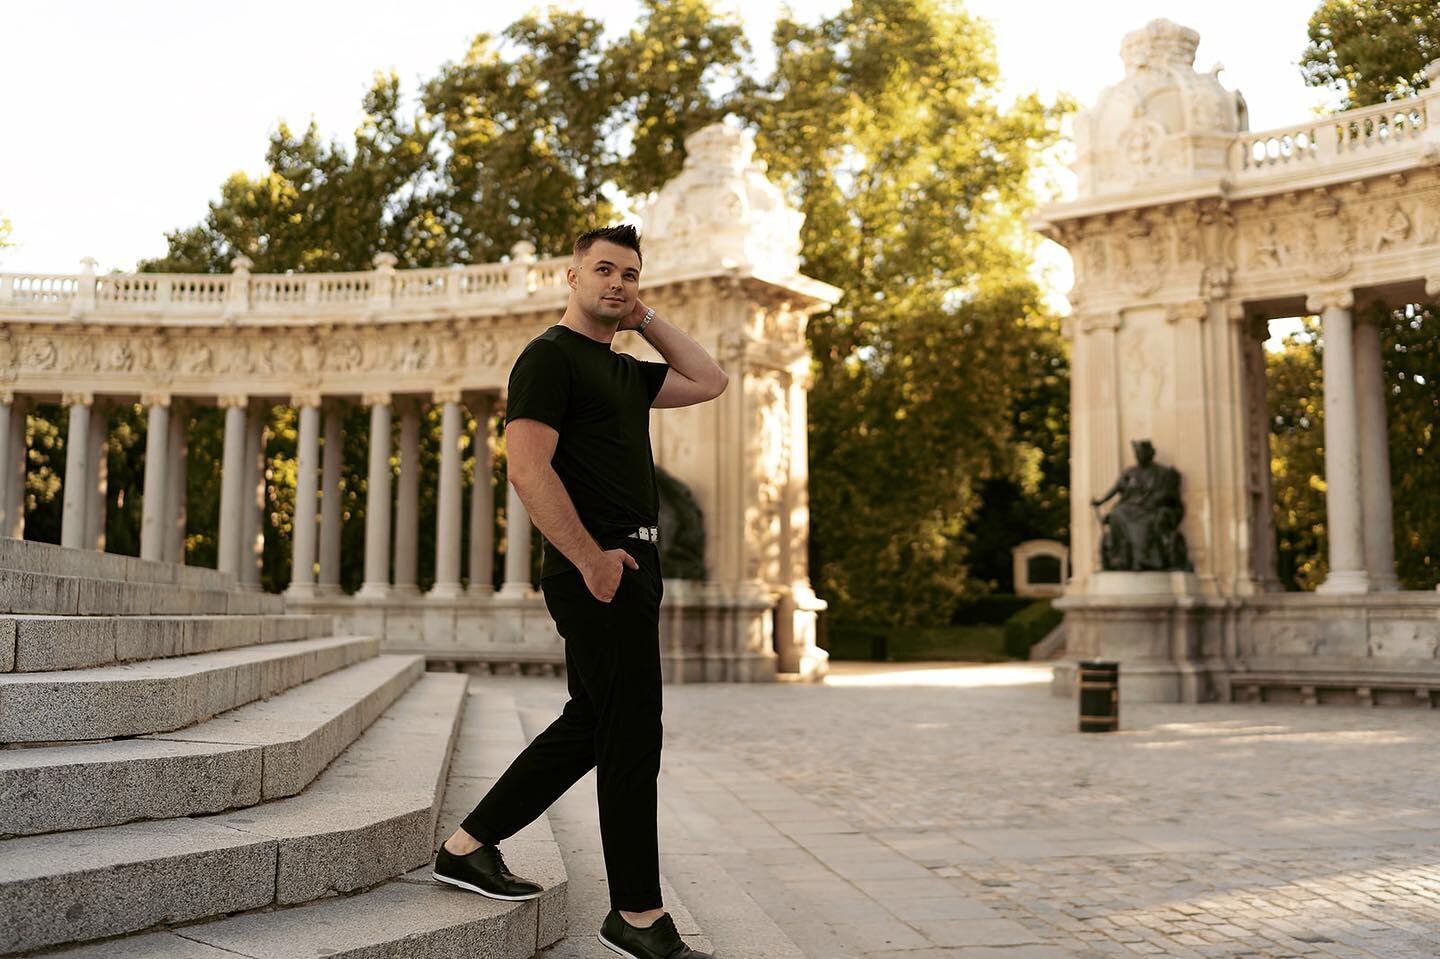 Greetings from the beautiful Estanque del Retiro in Madrid, Spain! 🇪🇸 

This stunning park has been the perfect spot for some much-needed relaxation and reflection on my travel and dance adventures.

Speaking of which, have you checked out my lates